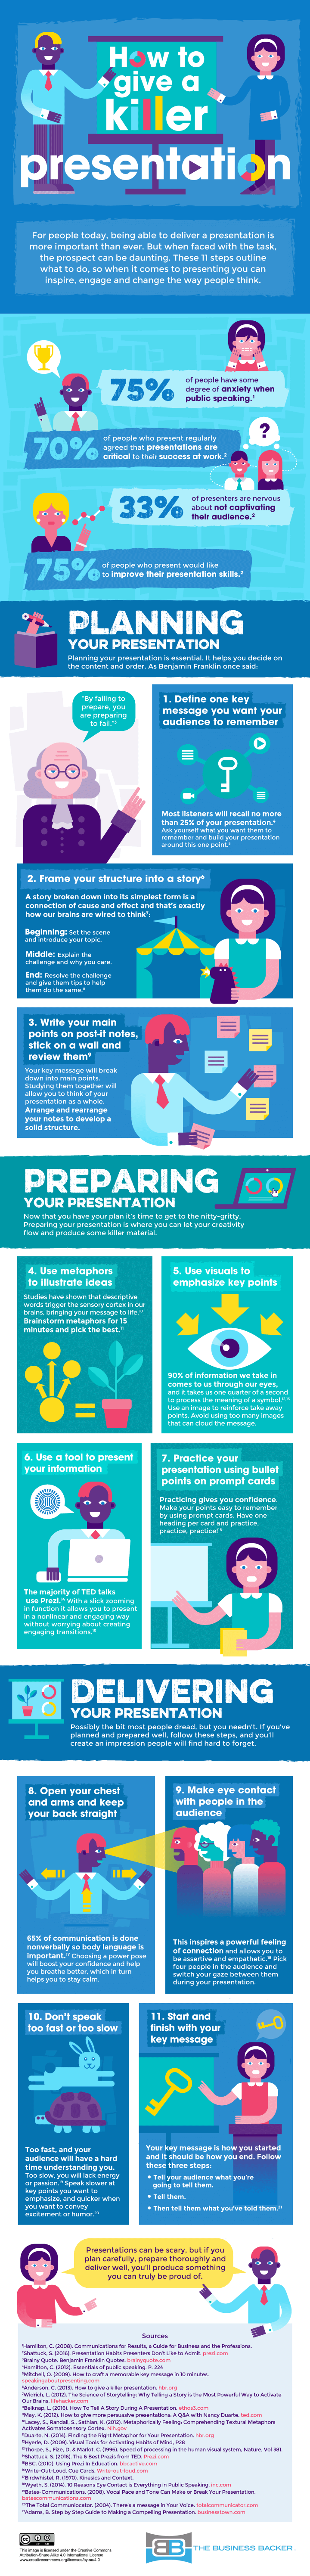 How to Give a Killer Presentation Infographic